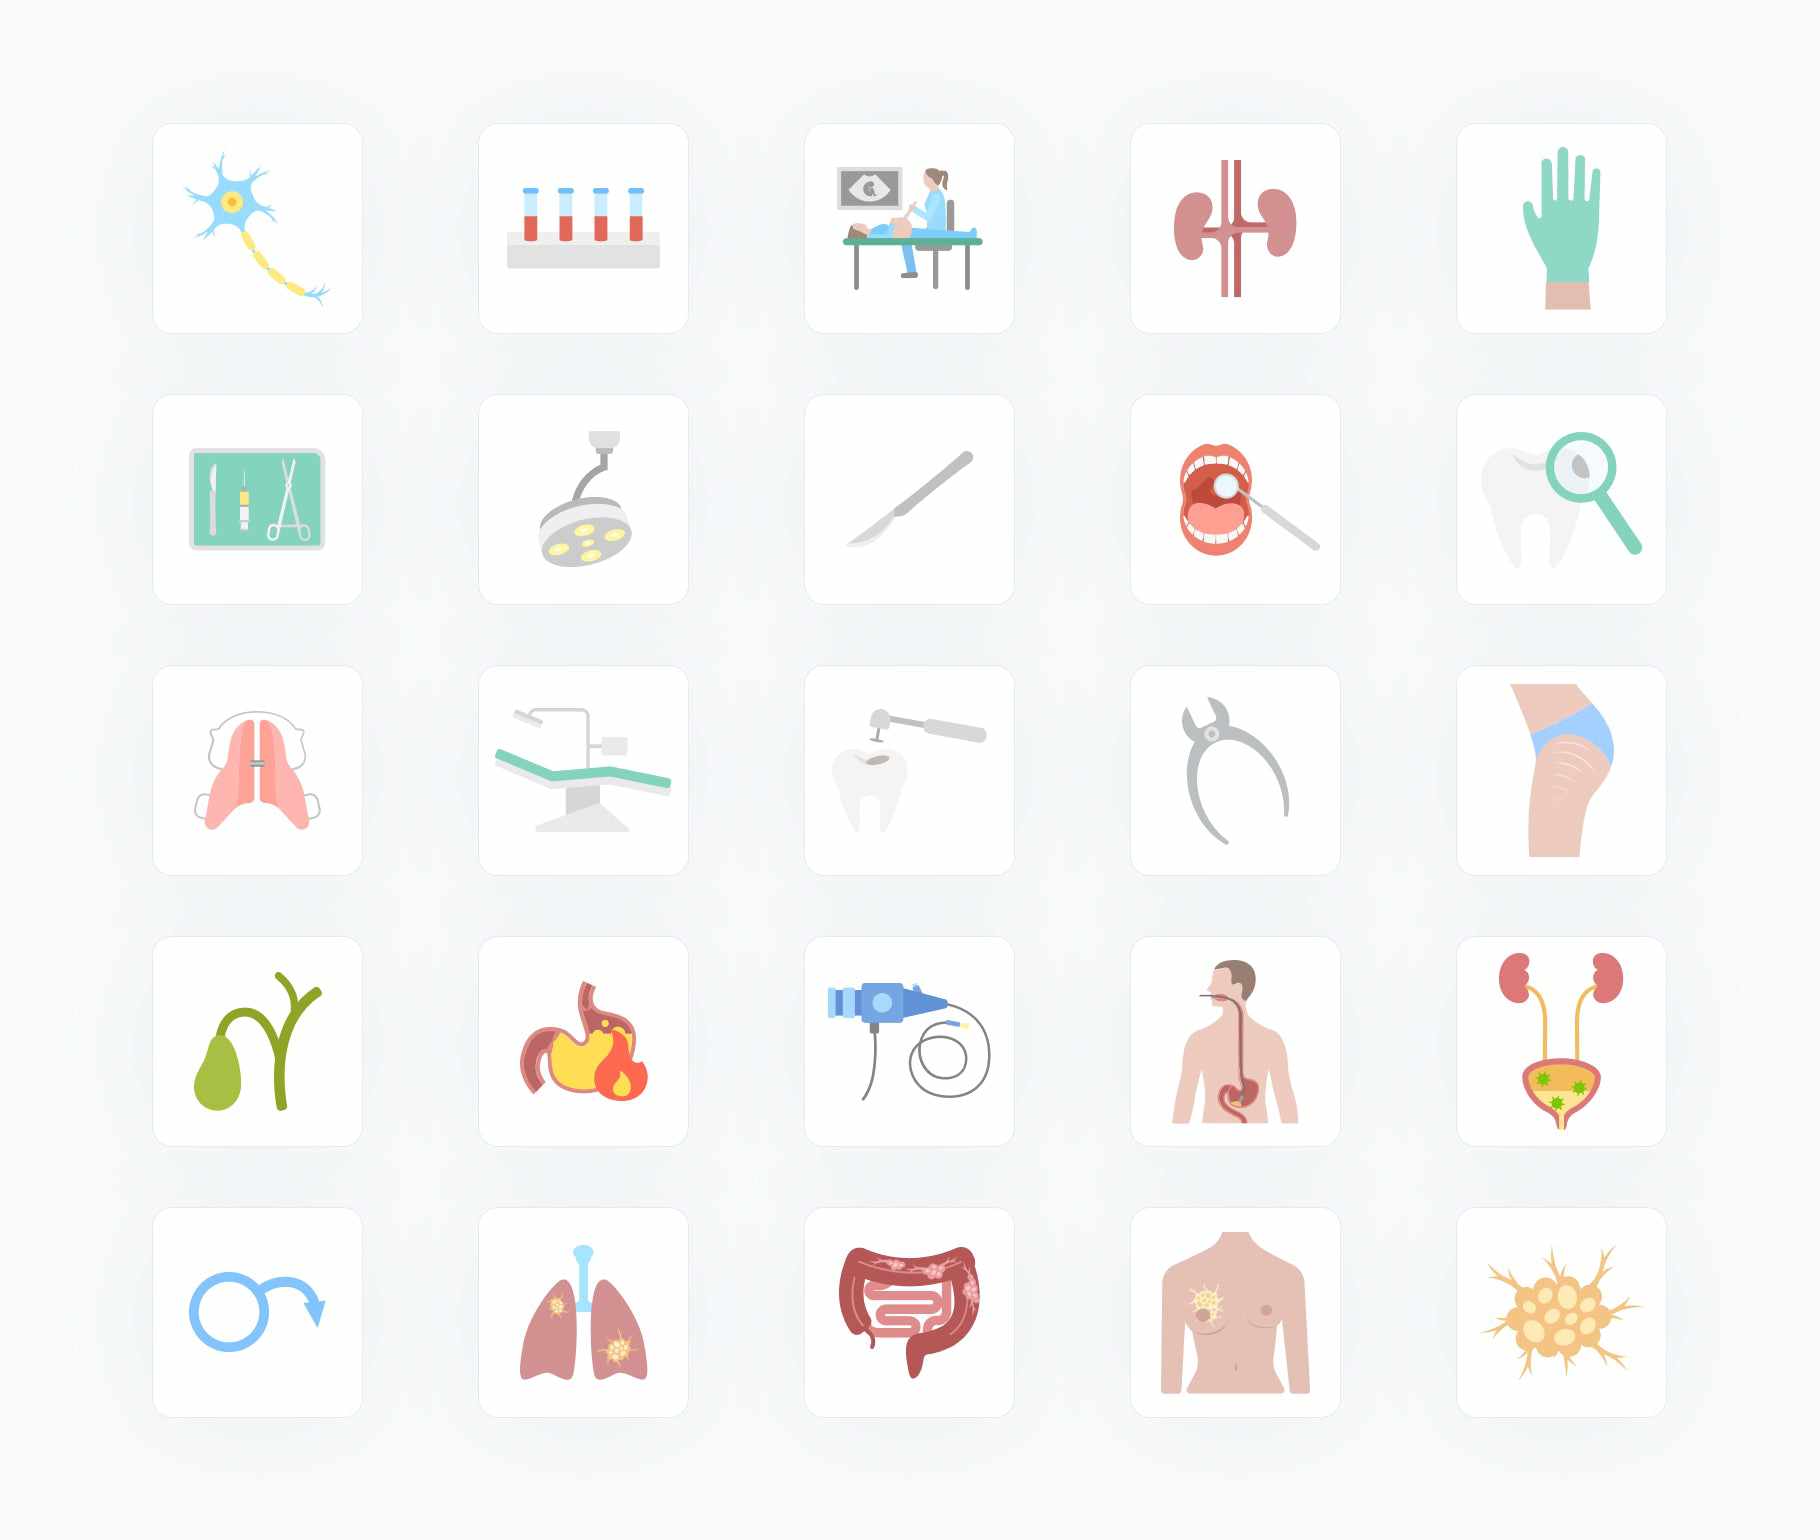 Medicine-Flat-Vector-Icons Icons Medicine Flat Vector Icons S01192208 powerpoint-template keynote-template google-slides-template infographic-template